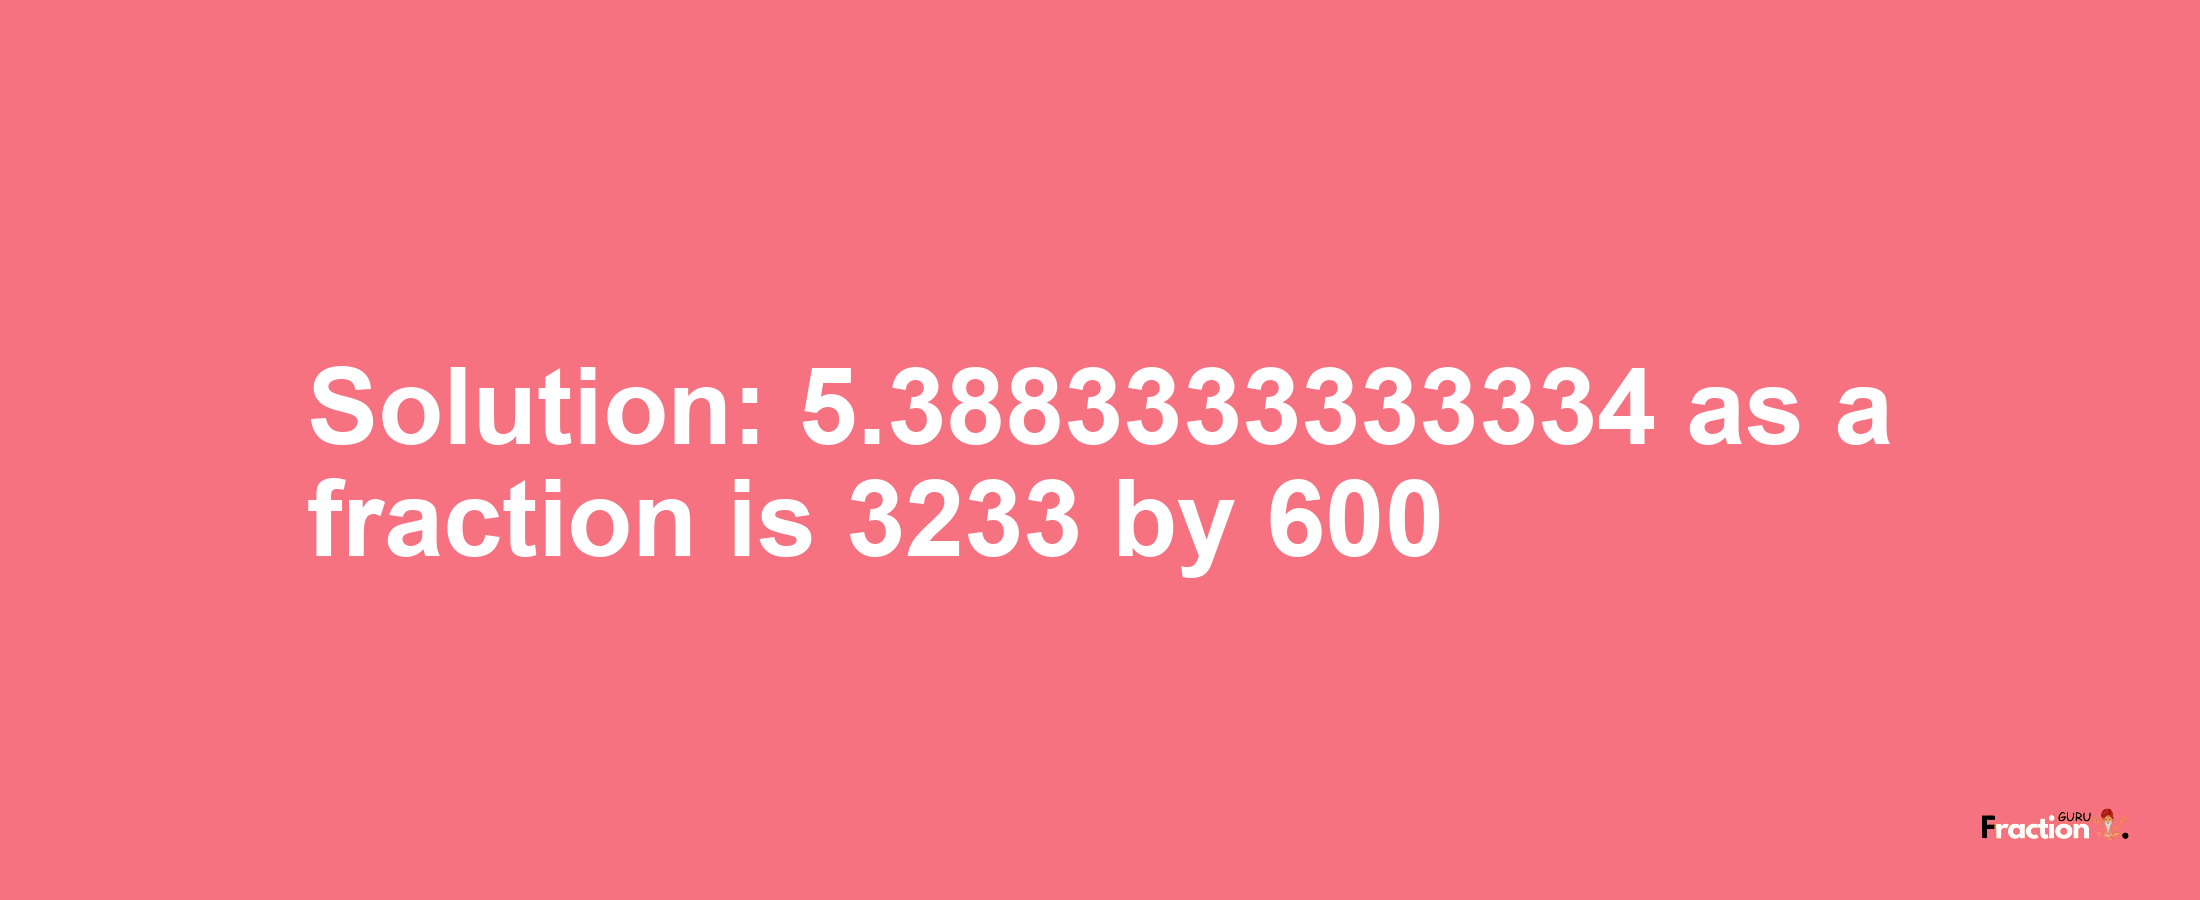 Solution:5.3883333333334 as a fraction is 3233/600